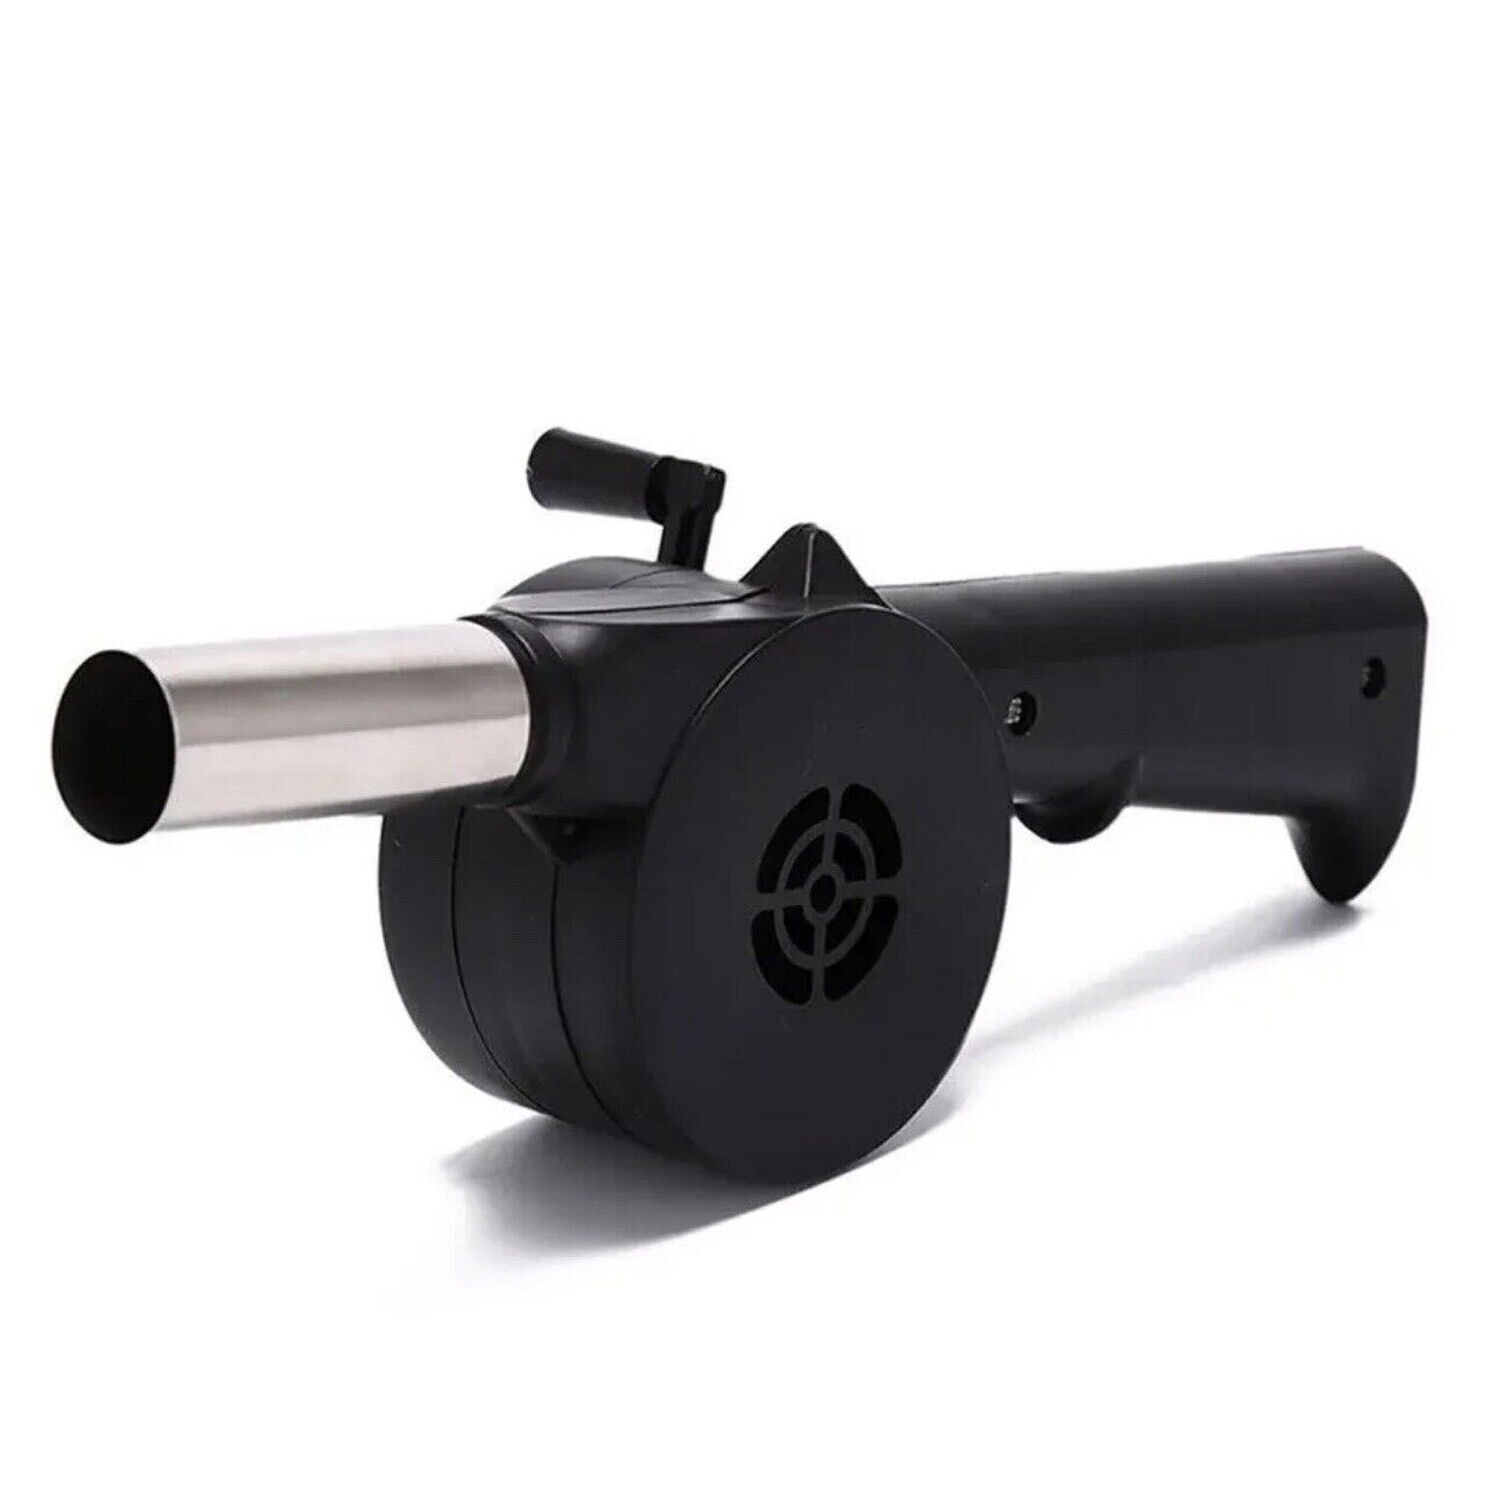 1PCS Portable Hand-Operated Blower For BBQ, Camping, And Fire Making Efficient